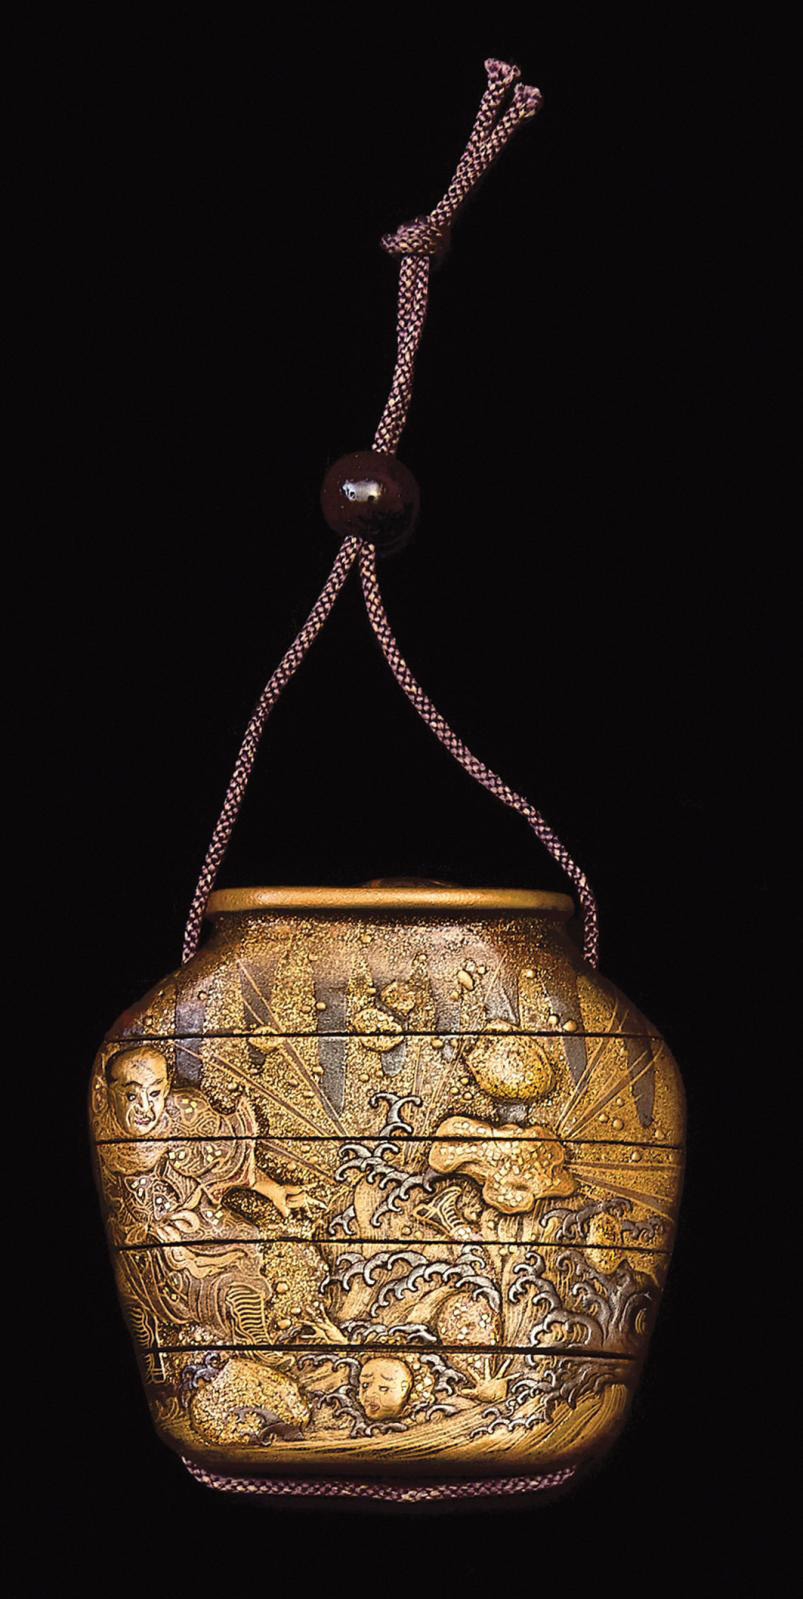 Japan, Edo period (1603-1868), 18th century. A four-case jar-shaped inrô nashiji lacquer inlay decorated in takamaki-e and kirikane with r